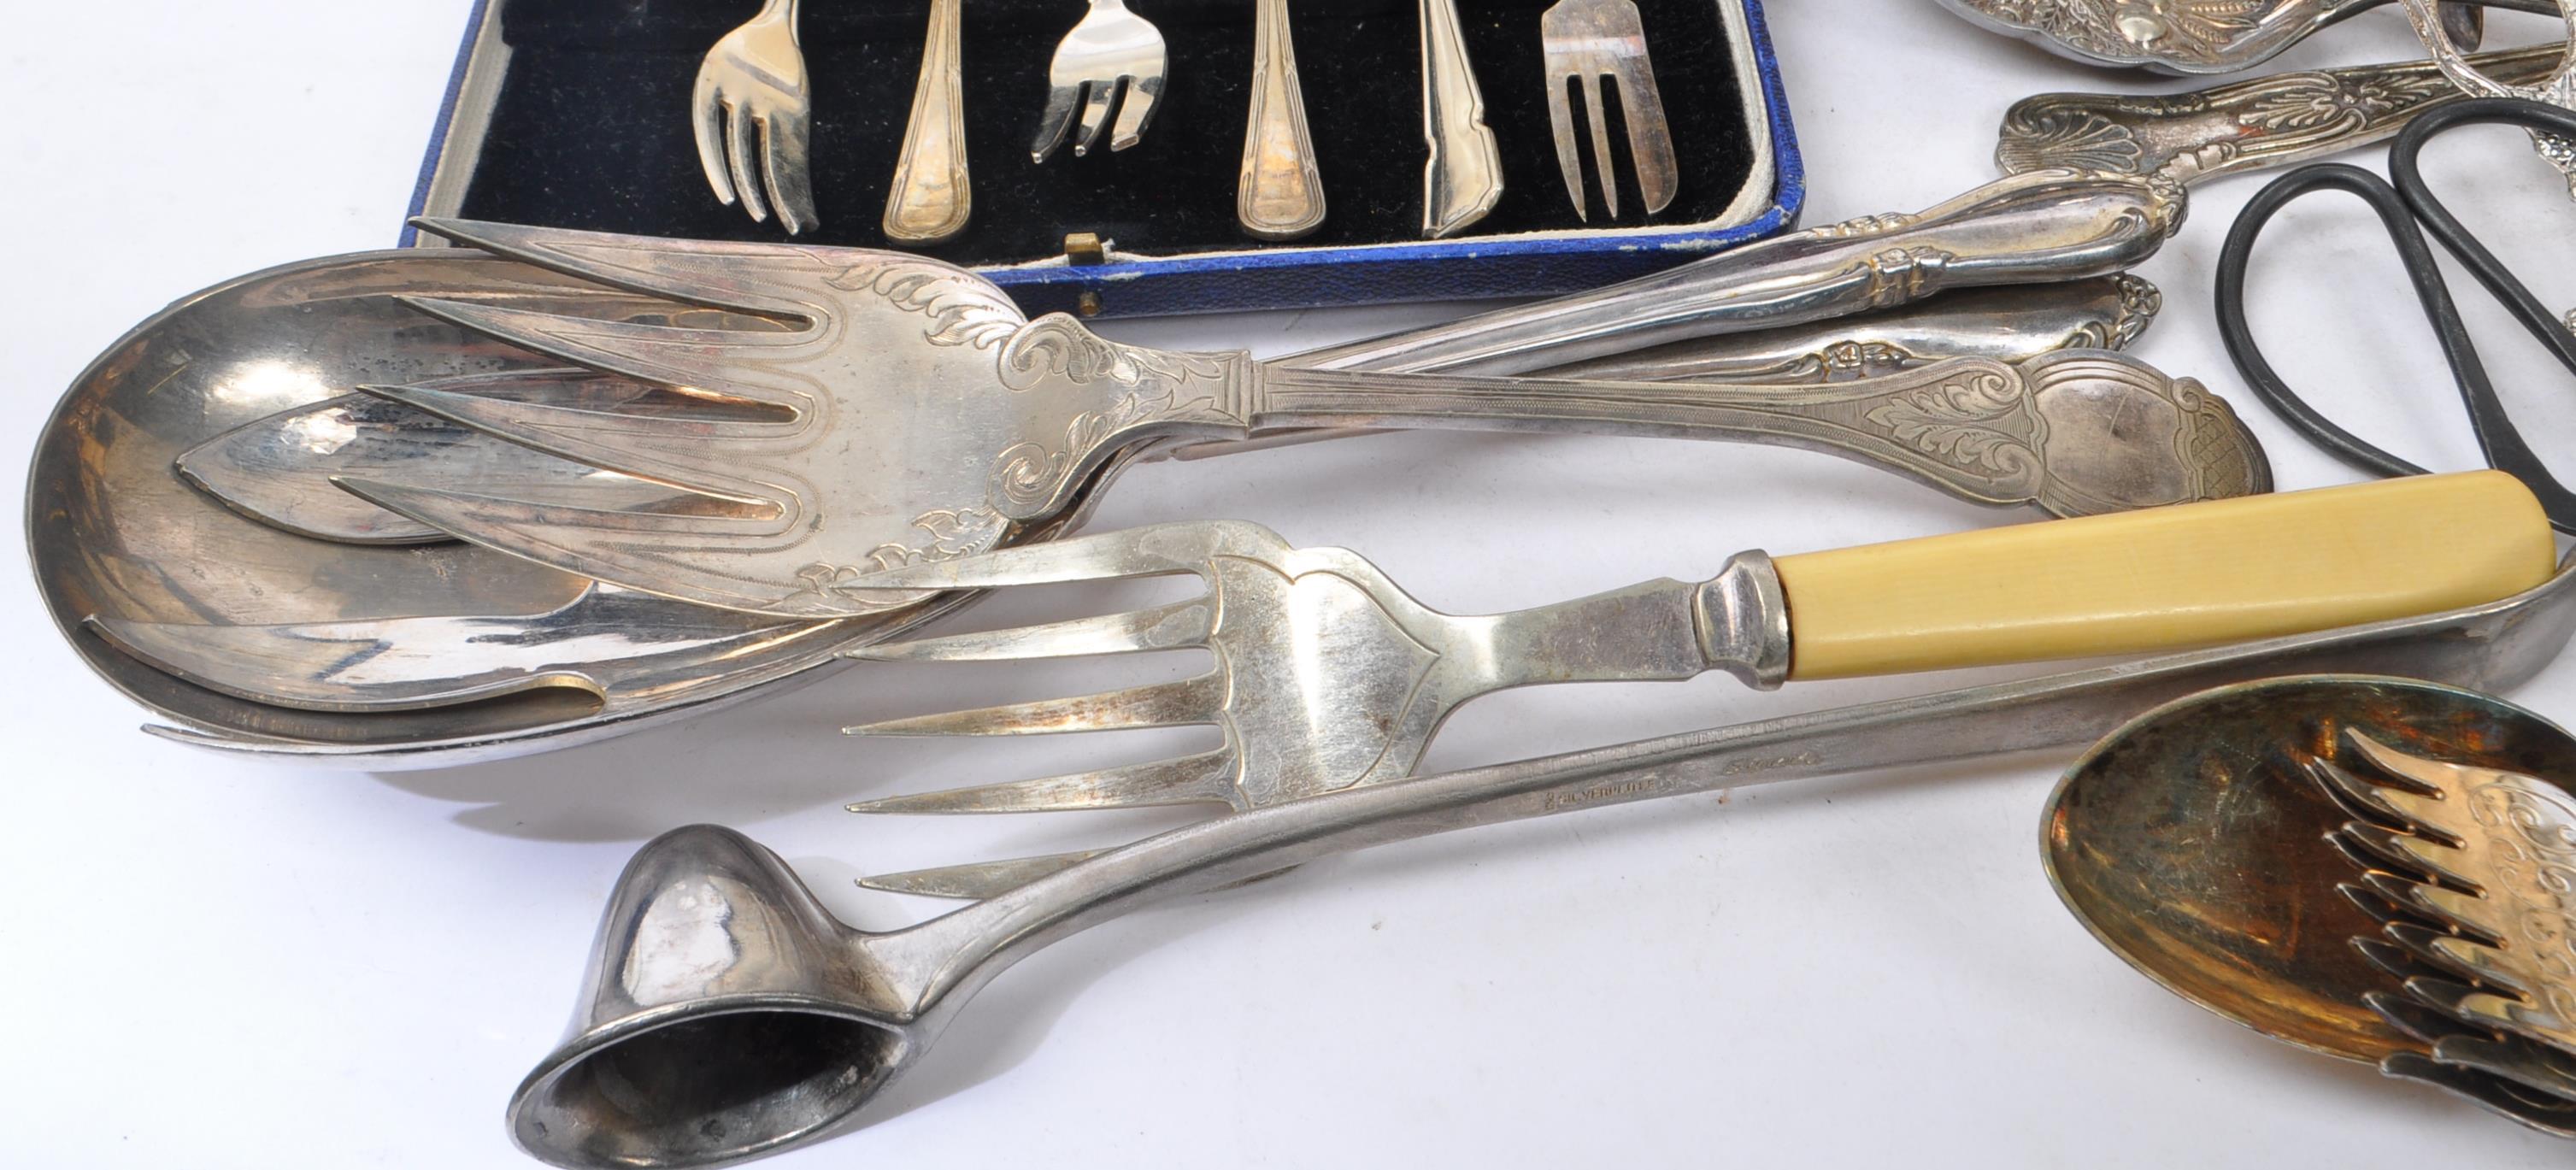 VINERS - BEAD PATTERN SILVER PLATE CUTLERY CANTEEN - Image 7 of 11